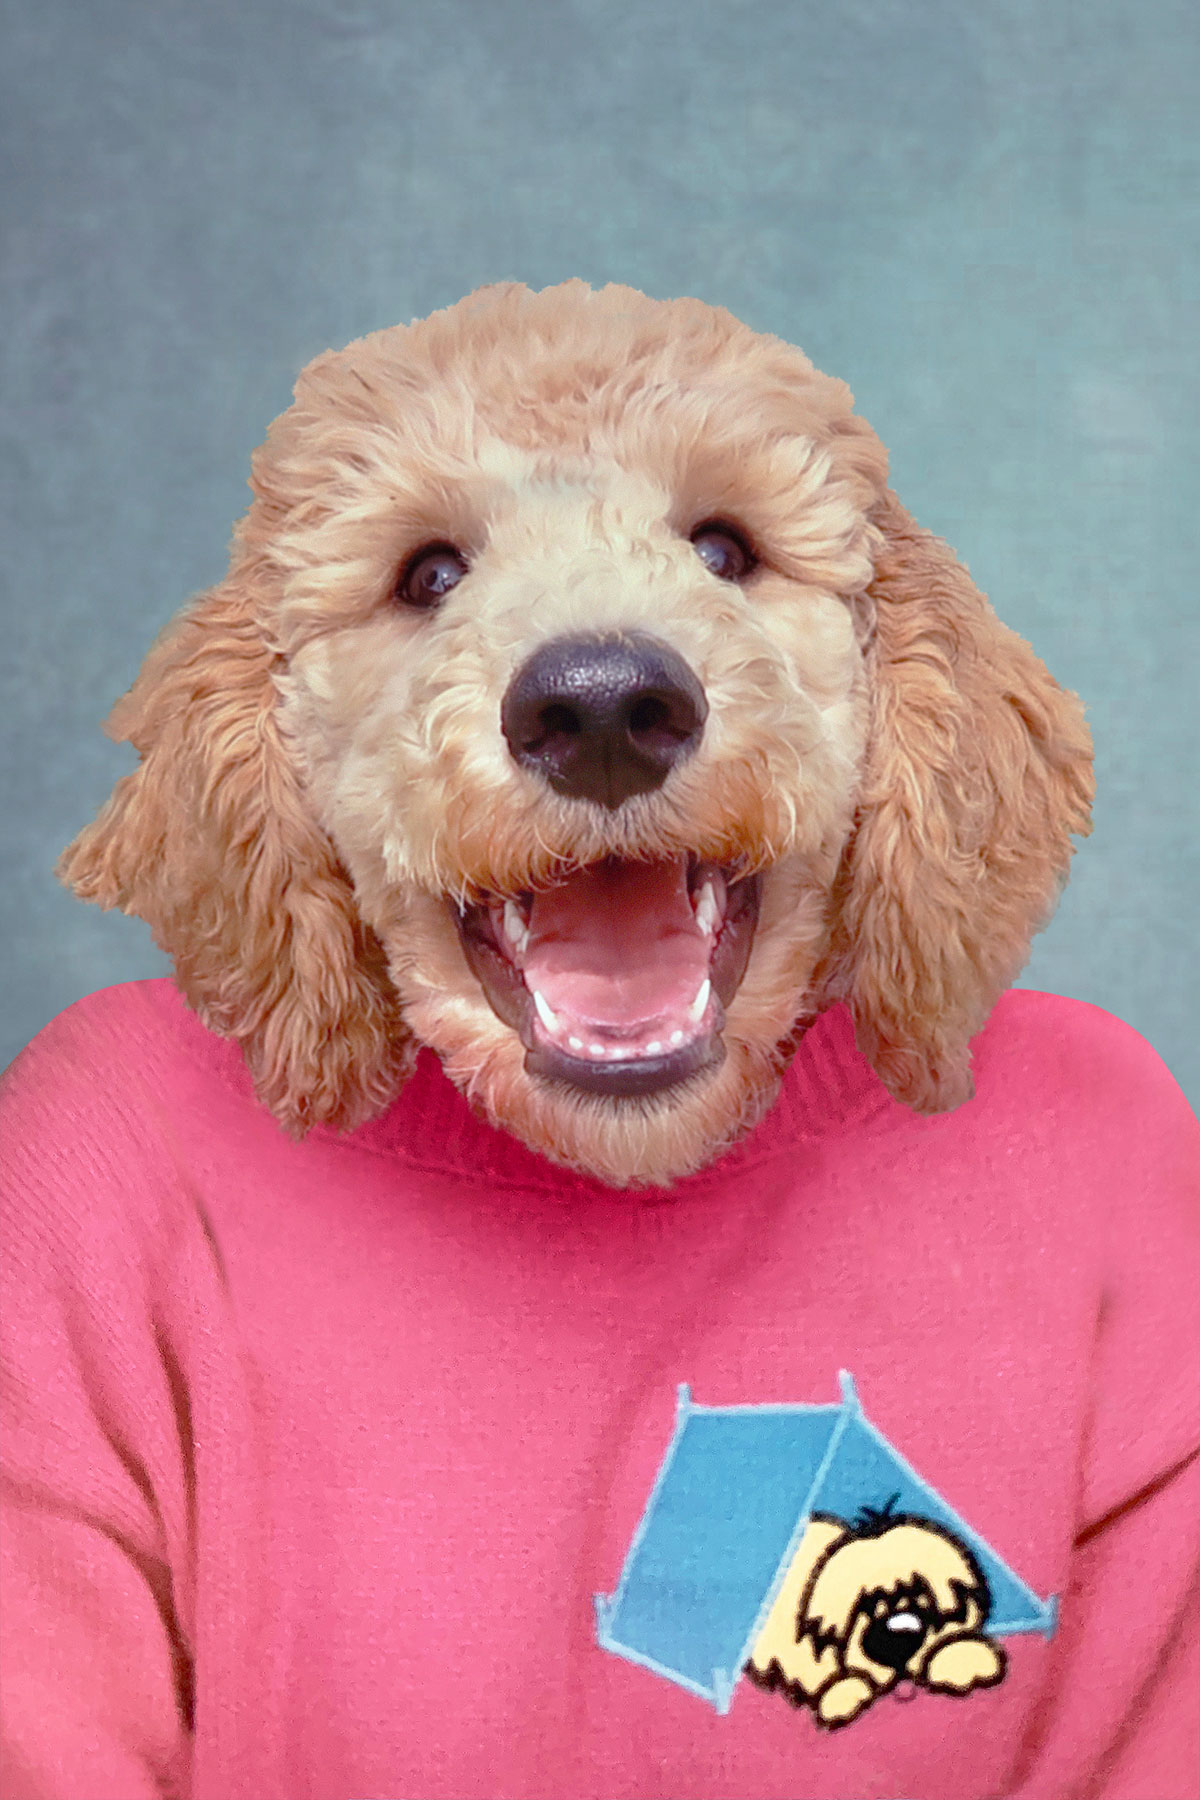 Composite retouching for a dog smiling